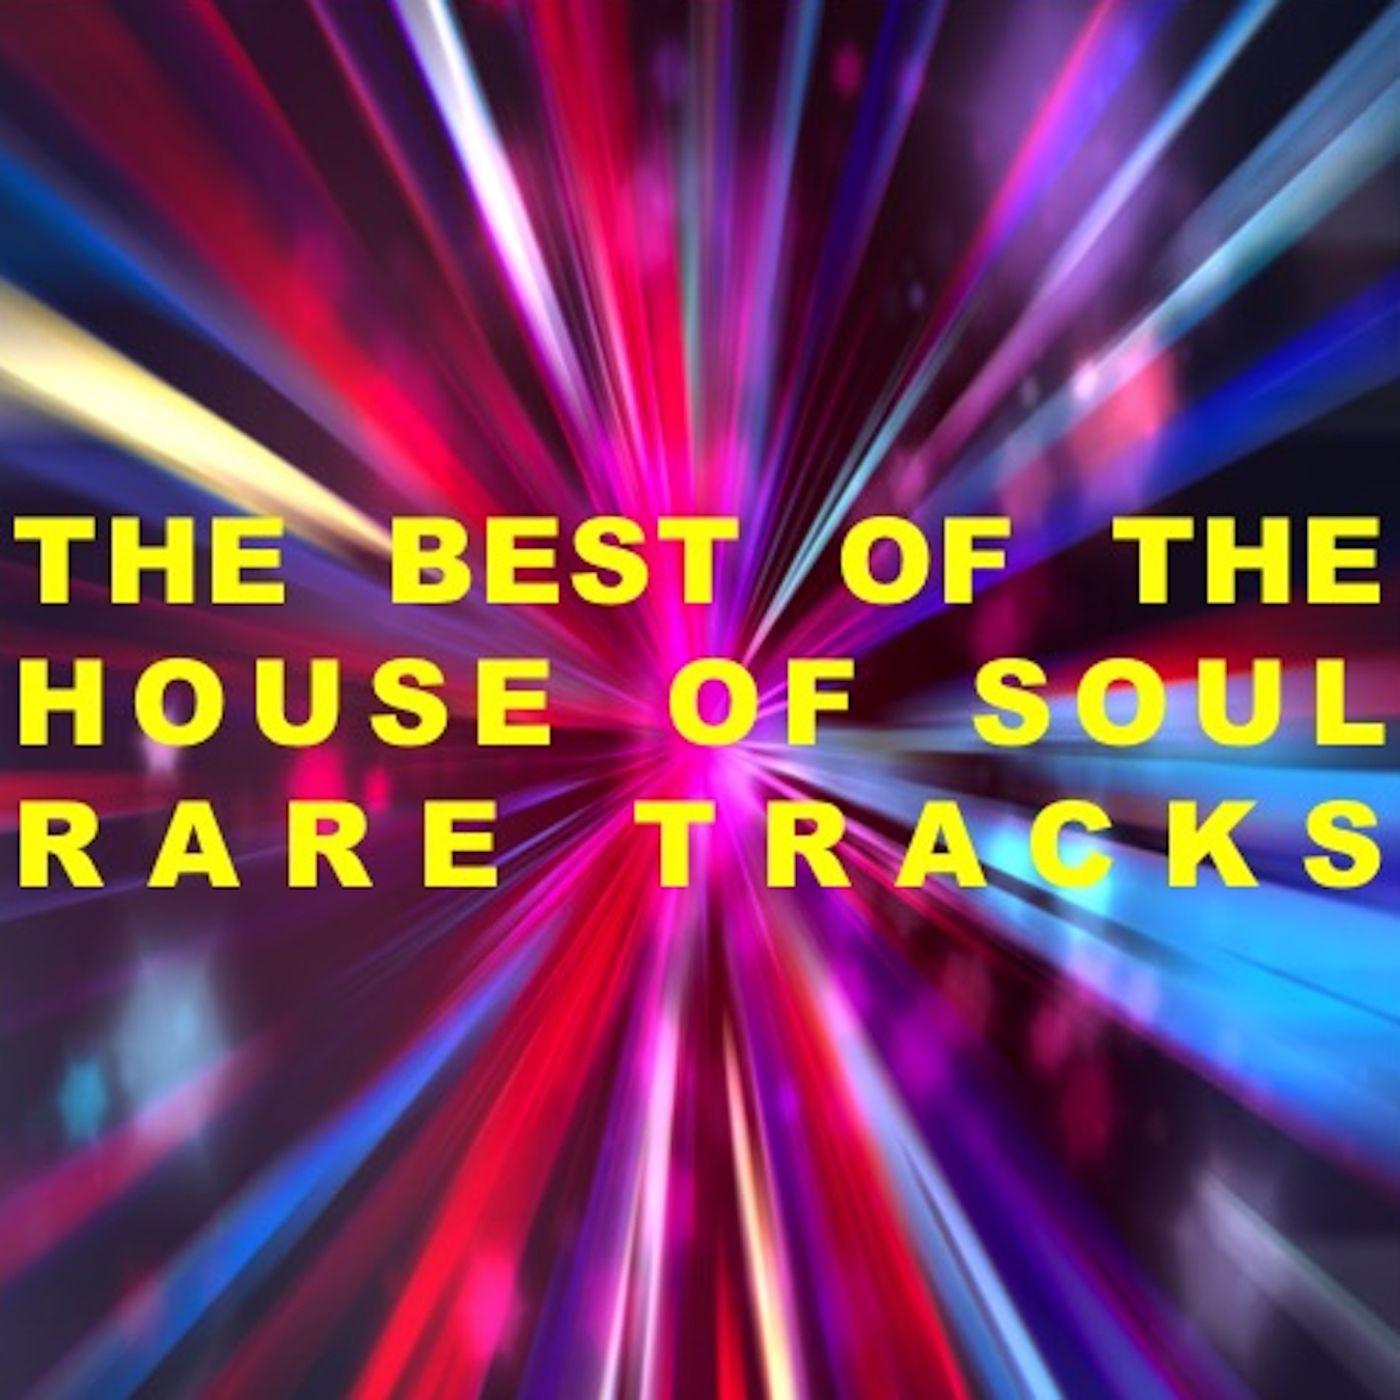 The Best of the House of Soul: Rare Tracks